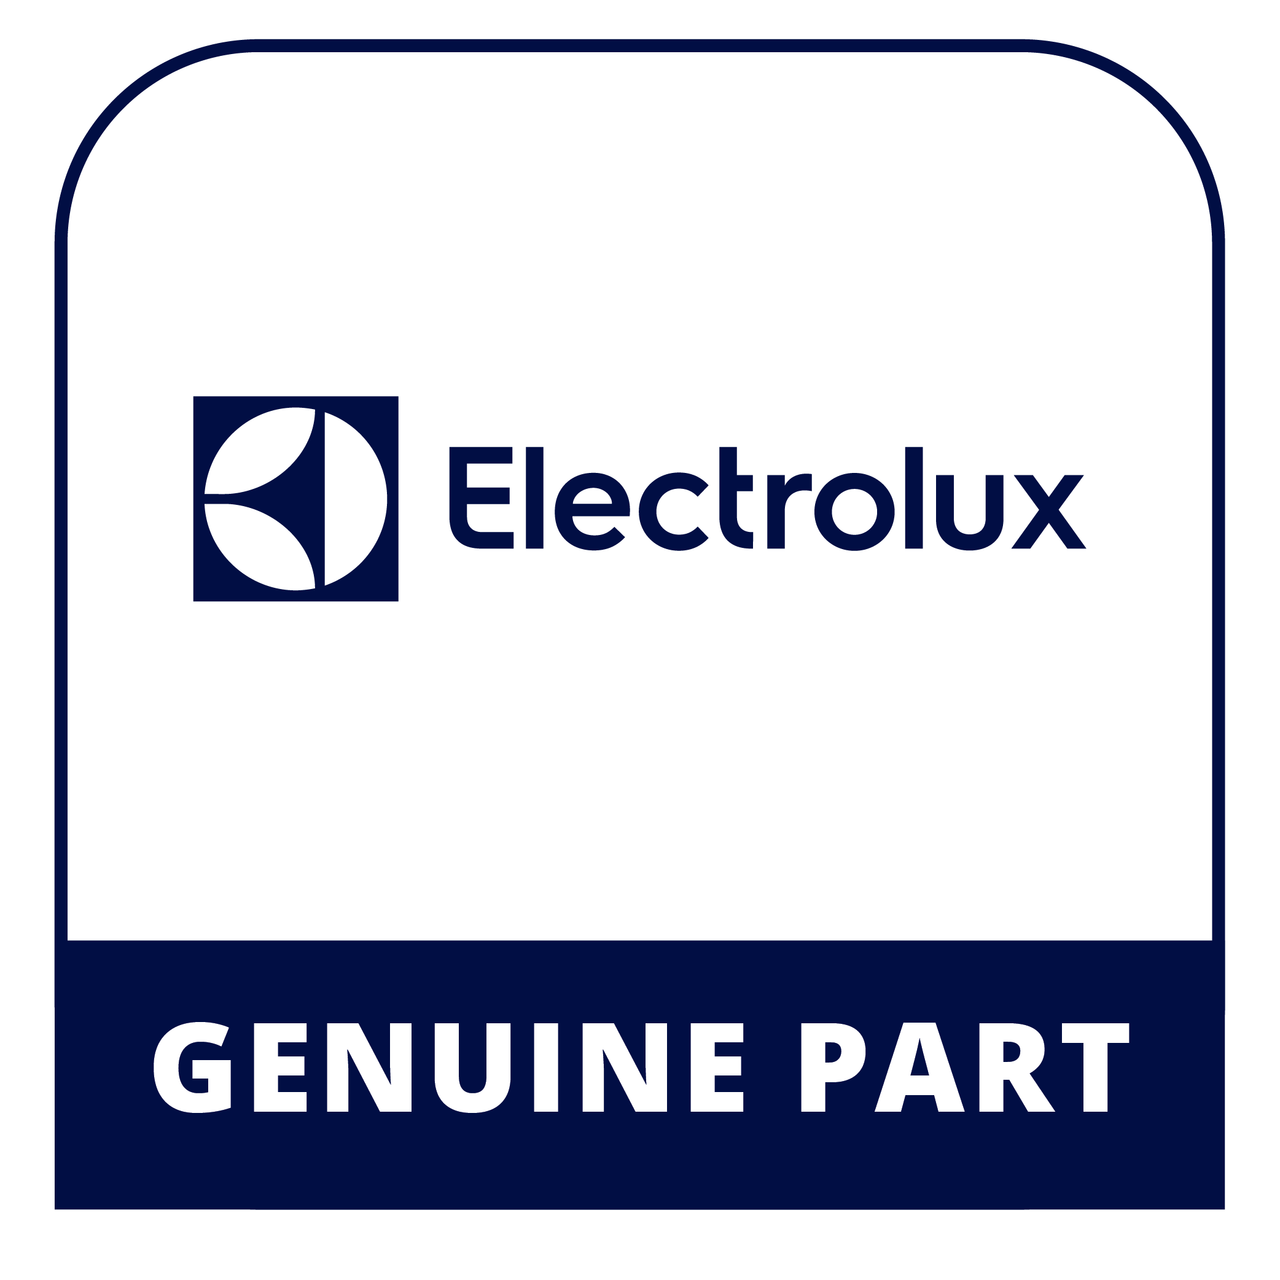 Frigidaire - Electrolux 316902017 Owners Manual - Genuine Electrolux Part